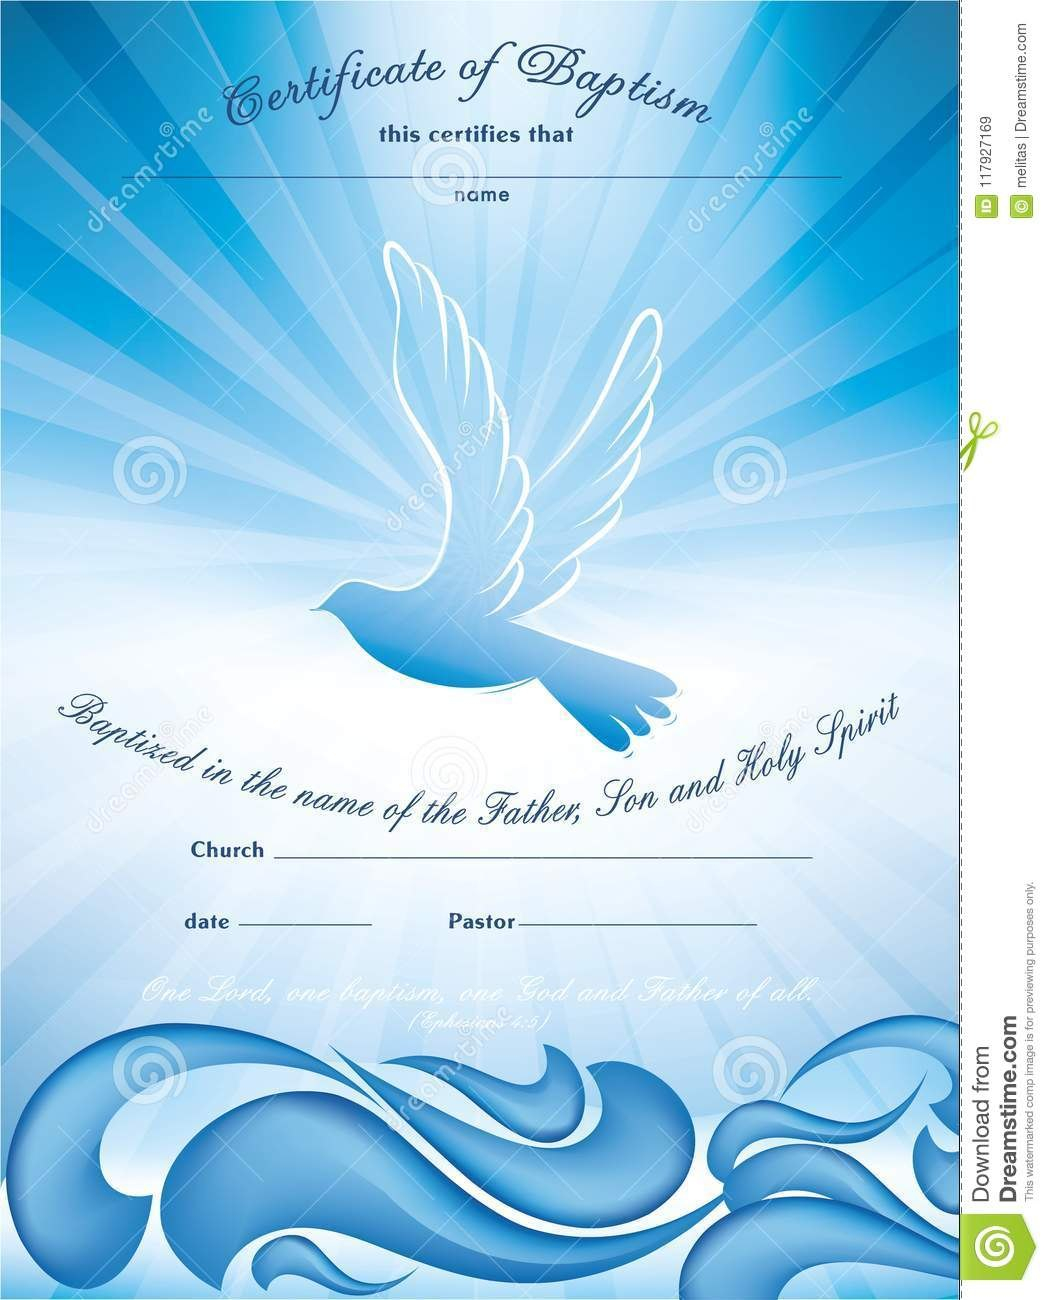 Certificate Baptism Template With Waves Of Water And Dove Multiple intended for Christian Baptism Certificate Template